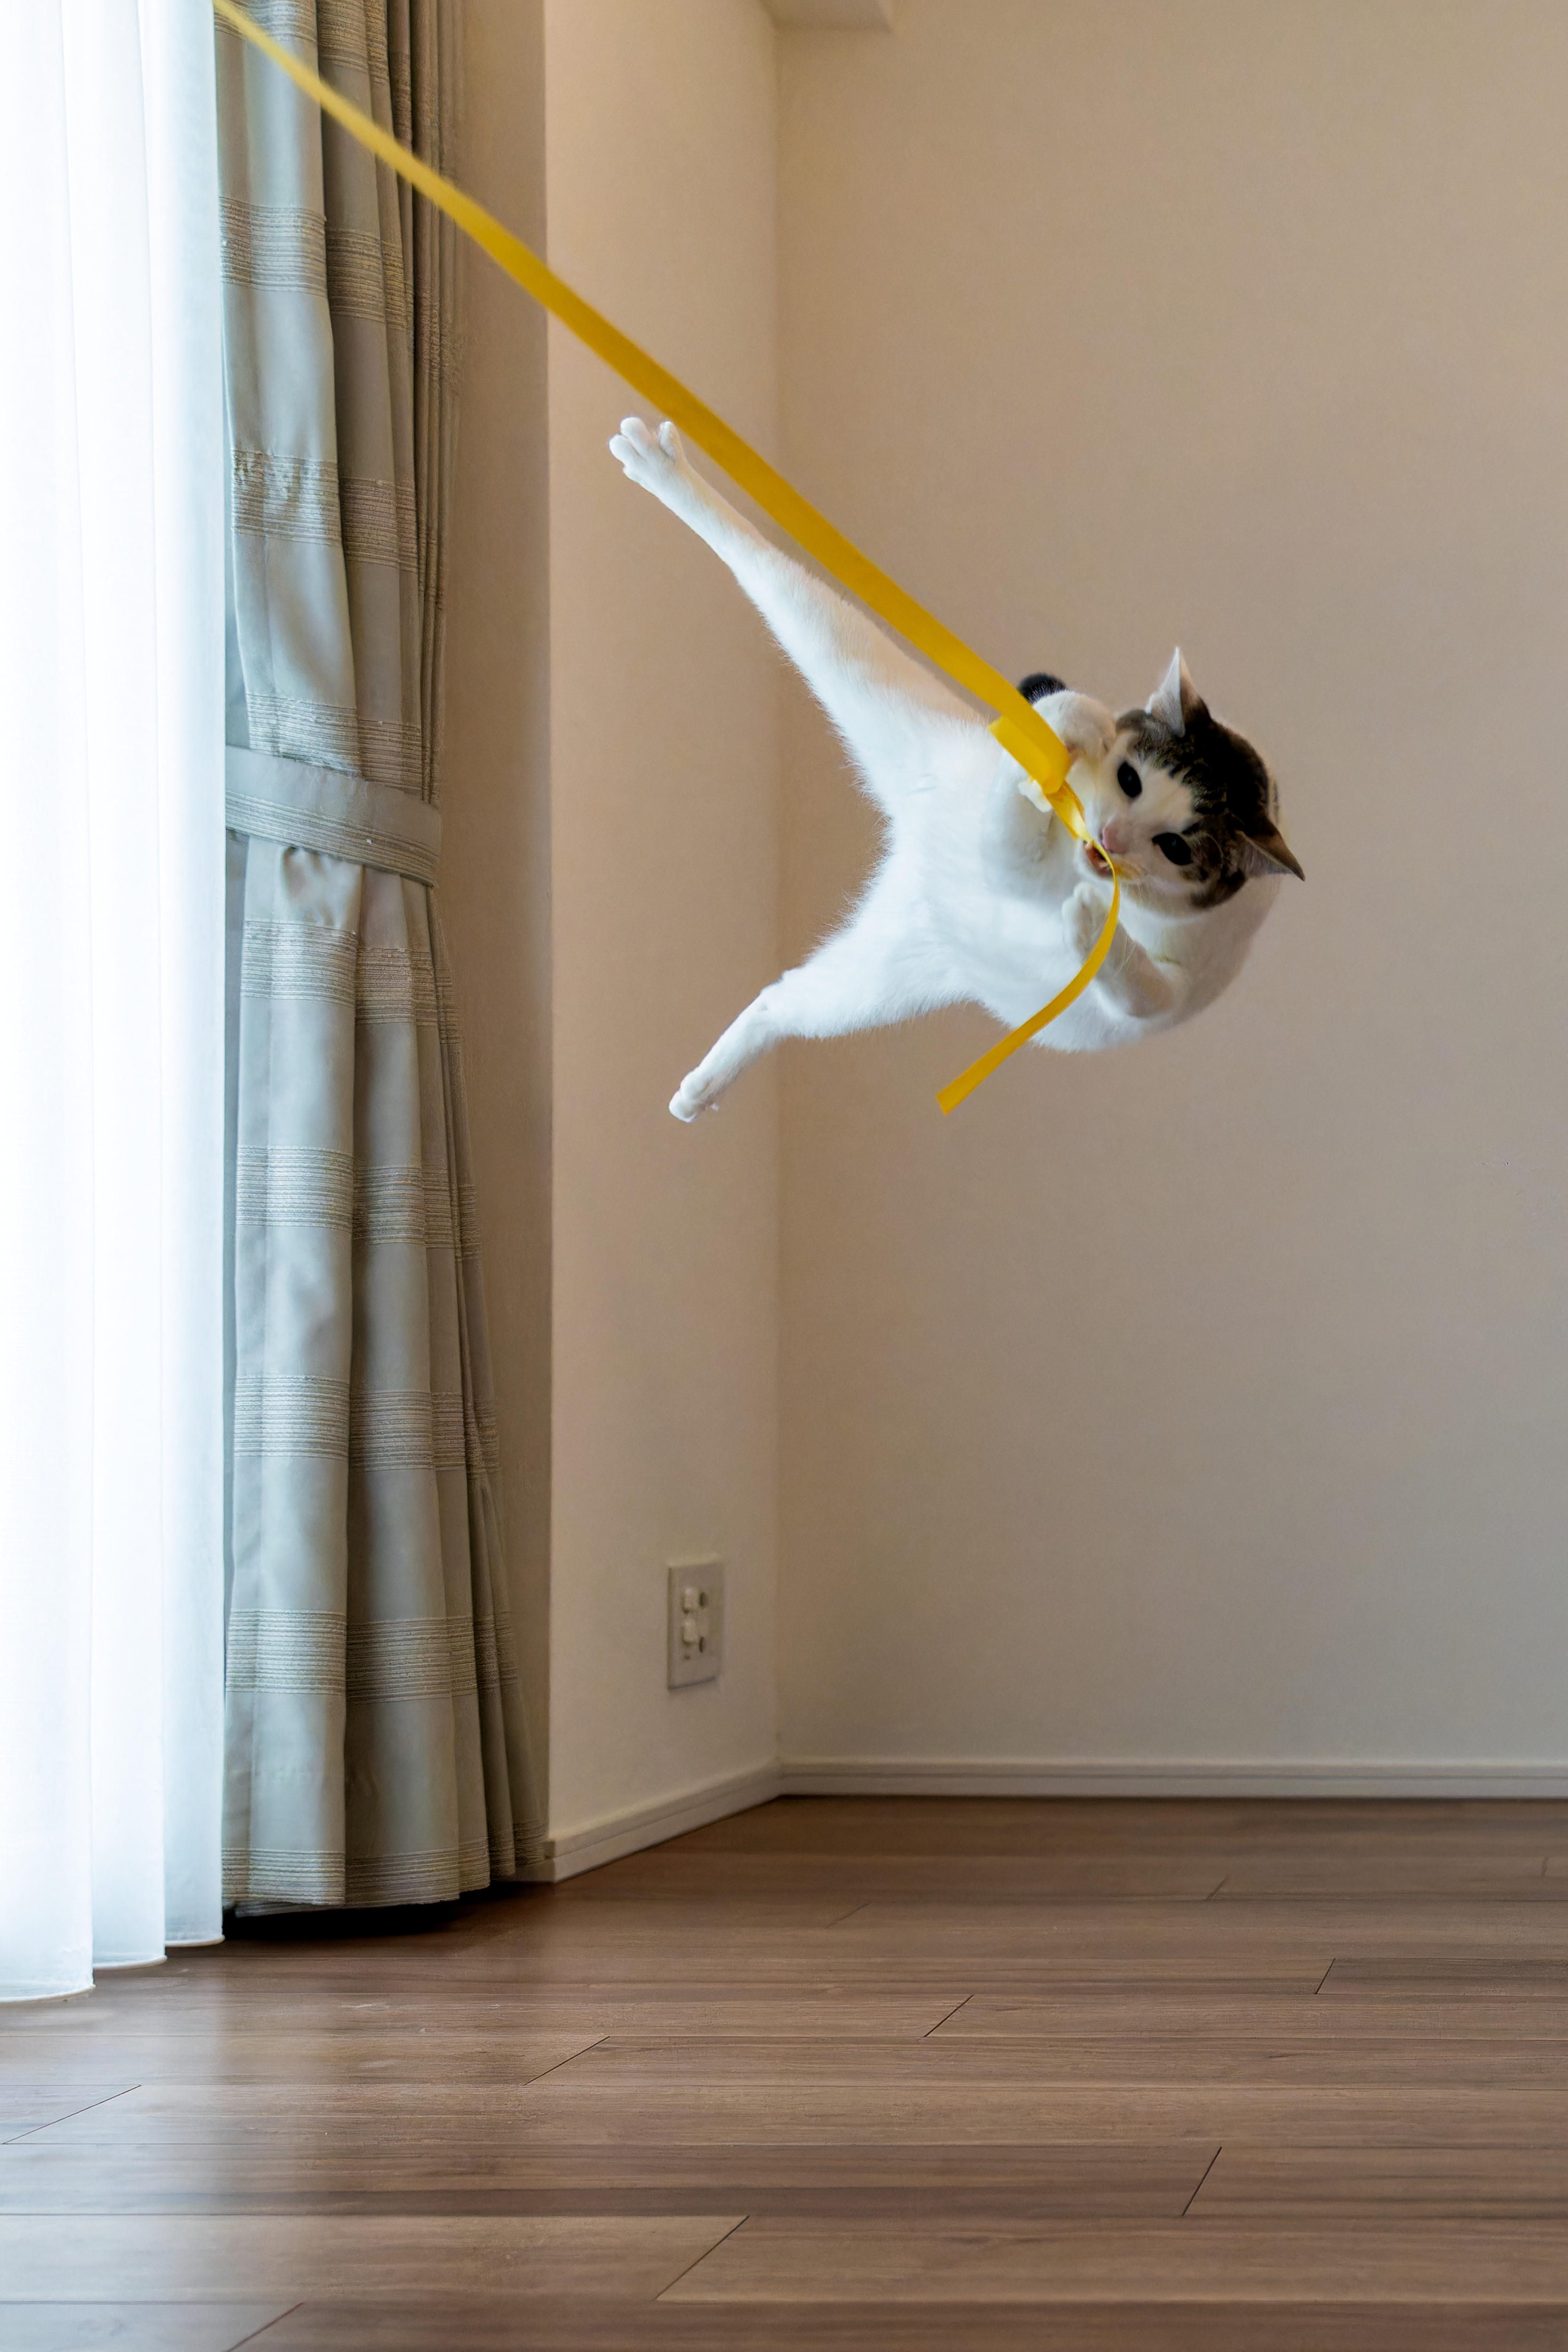 A white and brown cat flinging itself into the air from a yellow ribbon